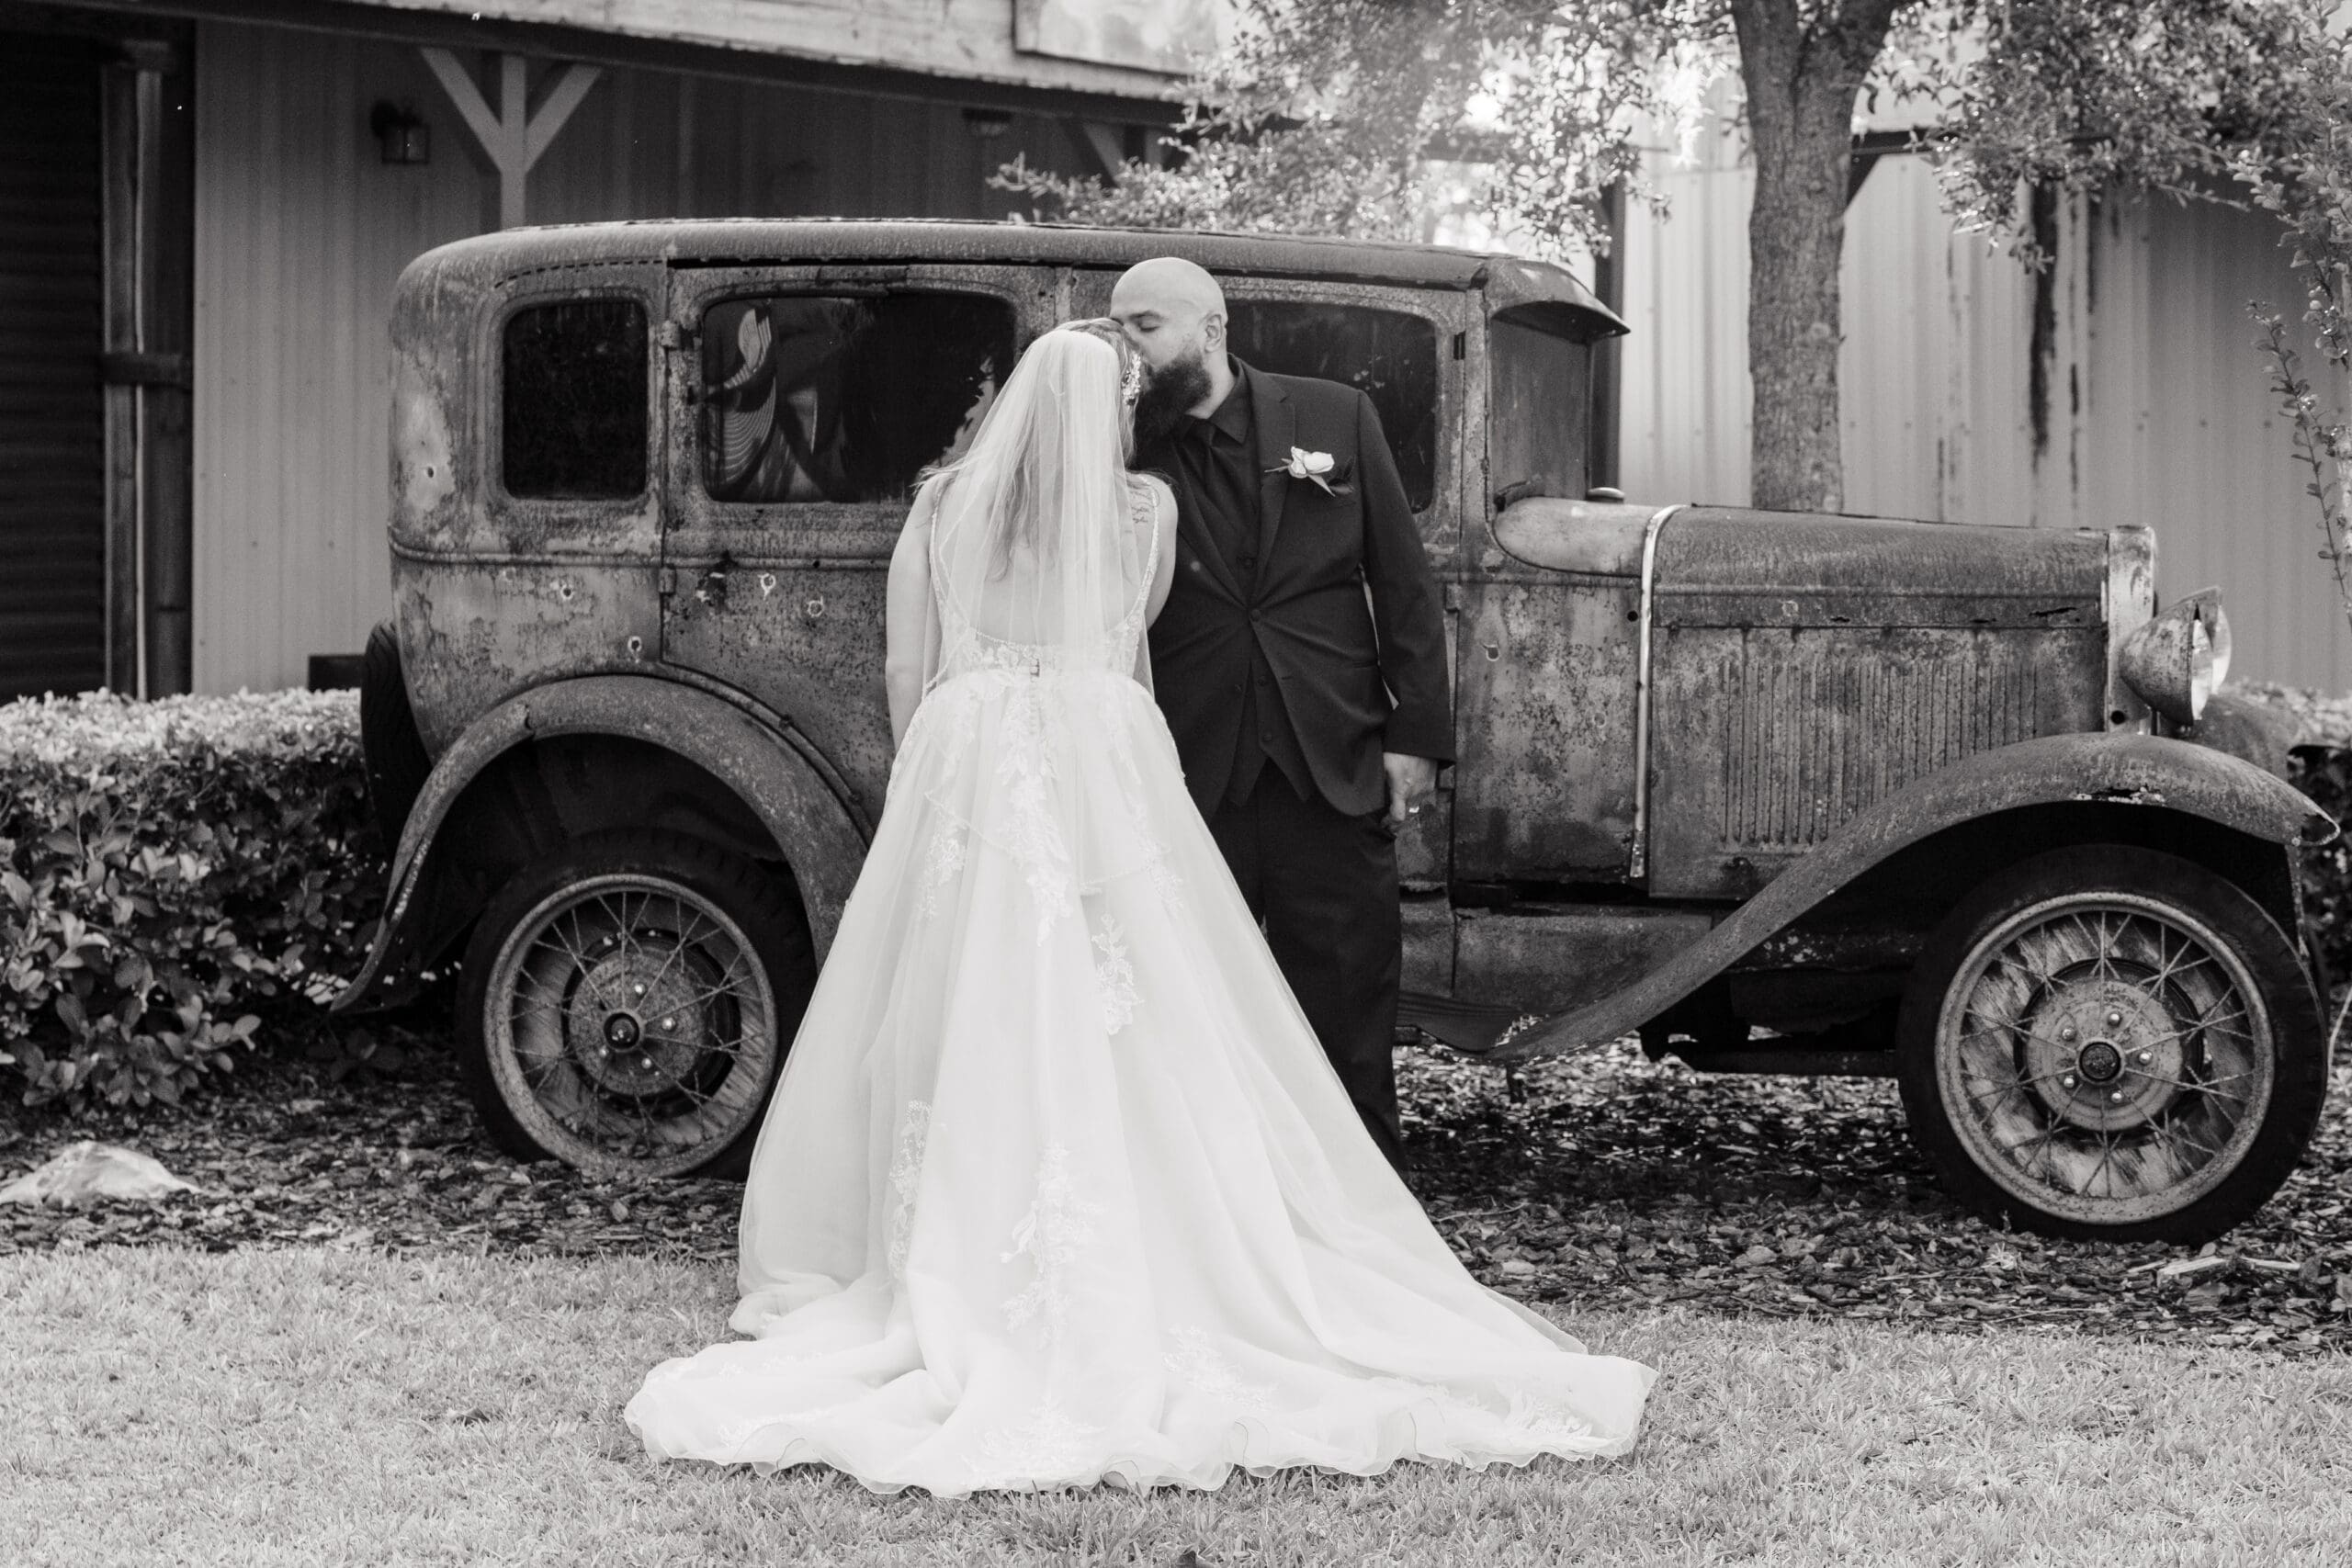 Newlyweds Kissing in Front of Rustic Car at Hidden Barn Venue